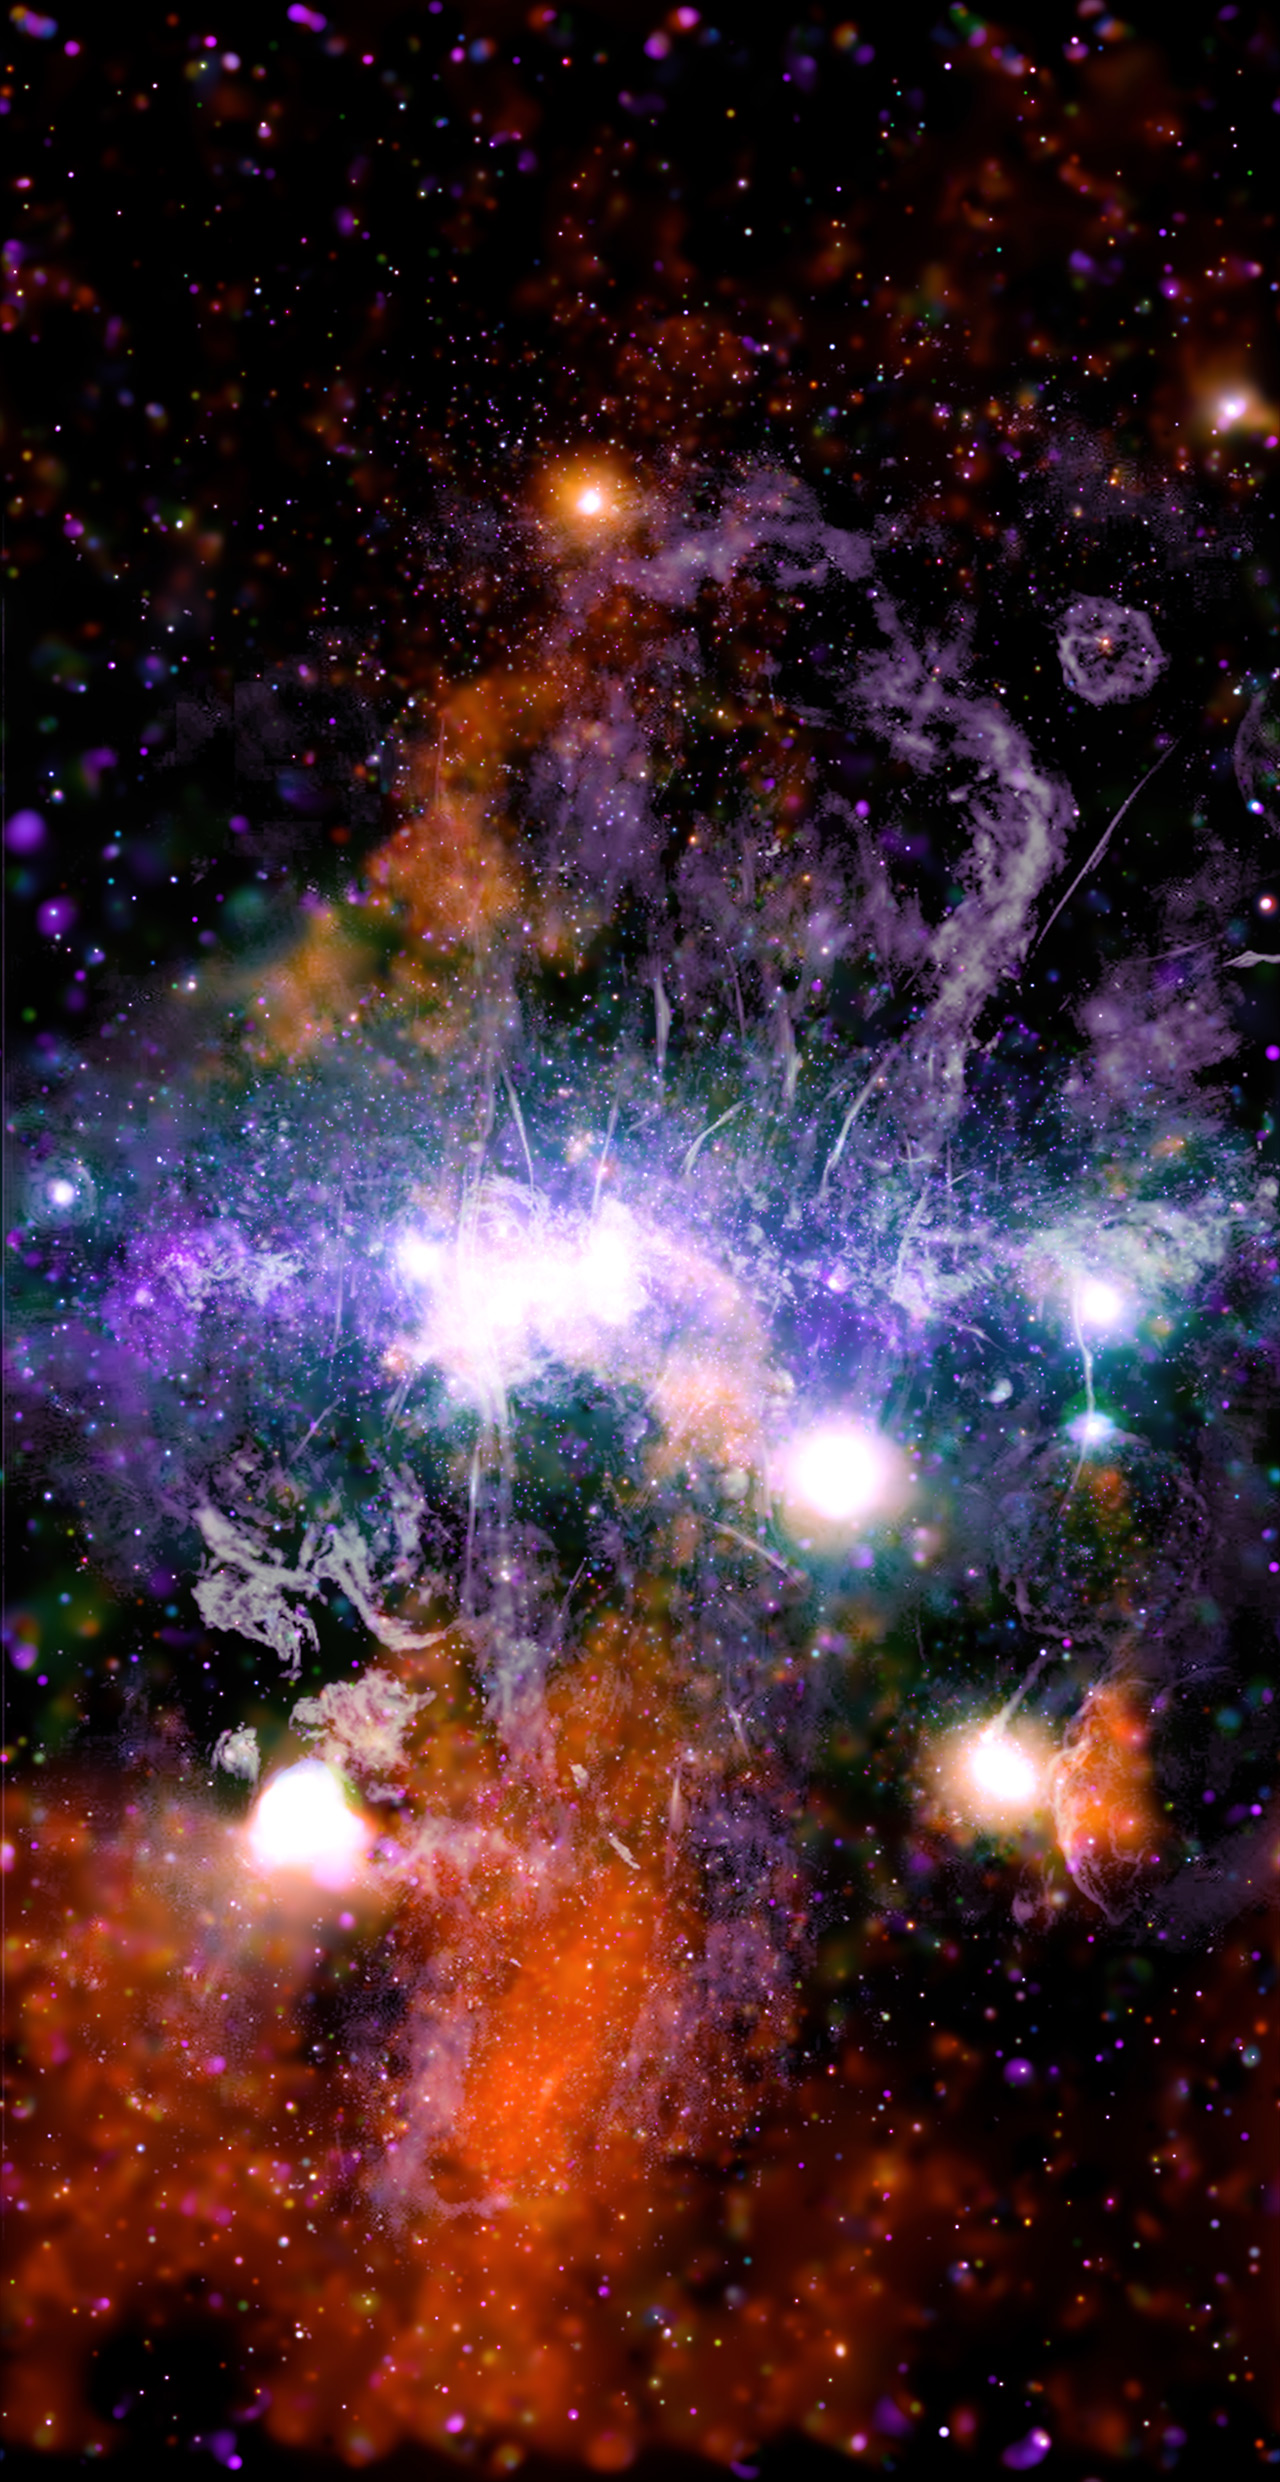 This vertical panoramic image depicts an area about the center of the Milky Way, with the field of view extending 1000 light years above and below the galaxy. The image resembles colorful gas clouds streaked with fine threads, dotted with a handful of brilliant white shapes. Throughout the image are tiny orange and purple dots set against a black backdrop. Across the center of the image is a horizontal, bright purple cloud with a glowing white core. This is the plane of the Milky Way, the disk where most of the Galaxy's stars reside. Below the plane of the Milky Way, near our lower left, is a bright, brick orange cloud. Above the plane, to our upper right, is a thin lilac cloud with some orange mist on the left. The orange cloud and mist are large plumes of hot gas. The colors represent different X-ray energies observed by Chandra. Even brighter than the glowing white core in the Milky Way are the brilliant white shapes that appear throughout the image. Two can be found to the right of the core, and two below the galaxy's plane. These are X-rays reflected from dust around bright X-ray sources.